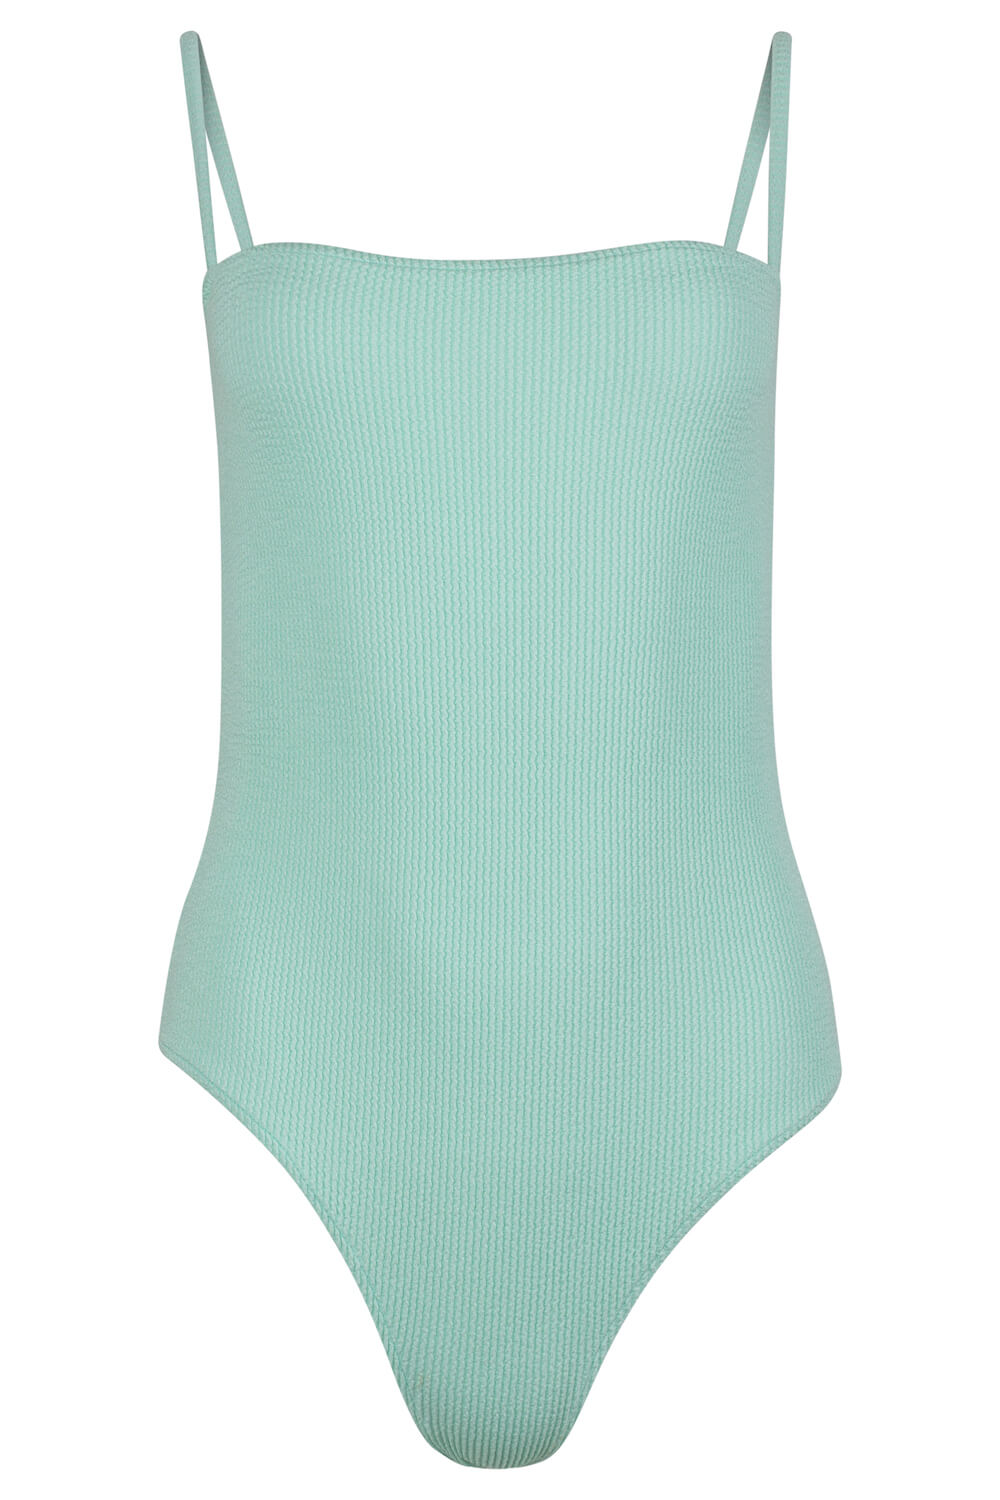 Lurex One Piece Swimsuit with Removable Pads in Lilac - Sauipe Swim